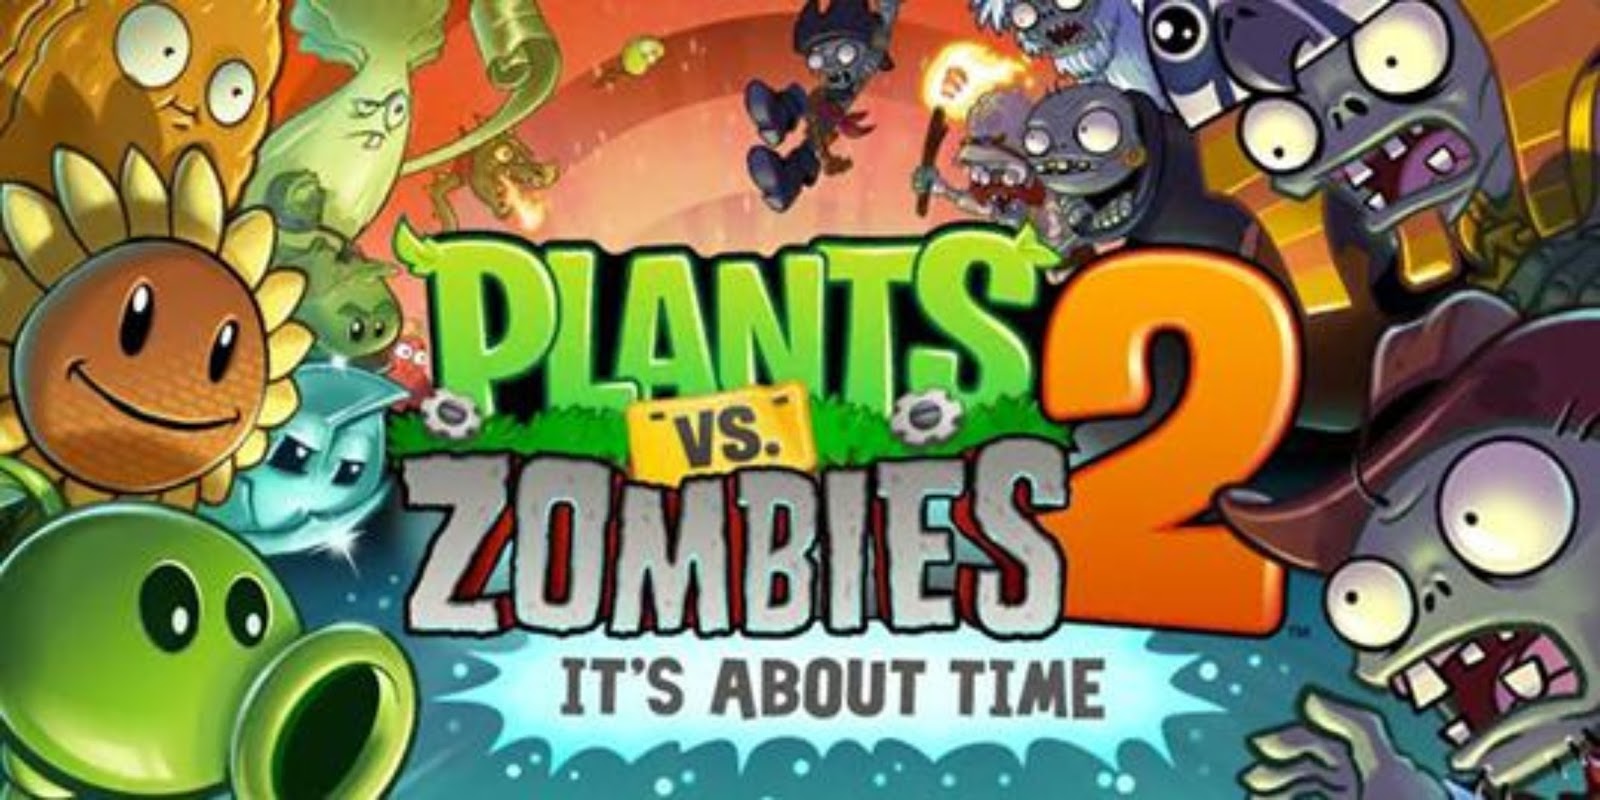 Plants vs Zombies 2 MOD APK + DATA Full Android